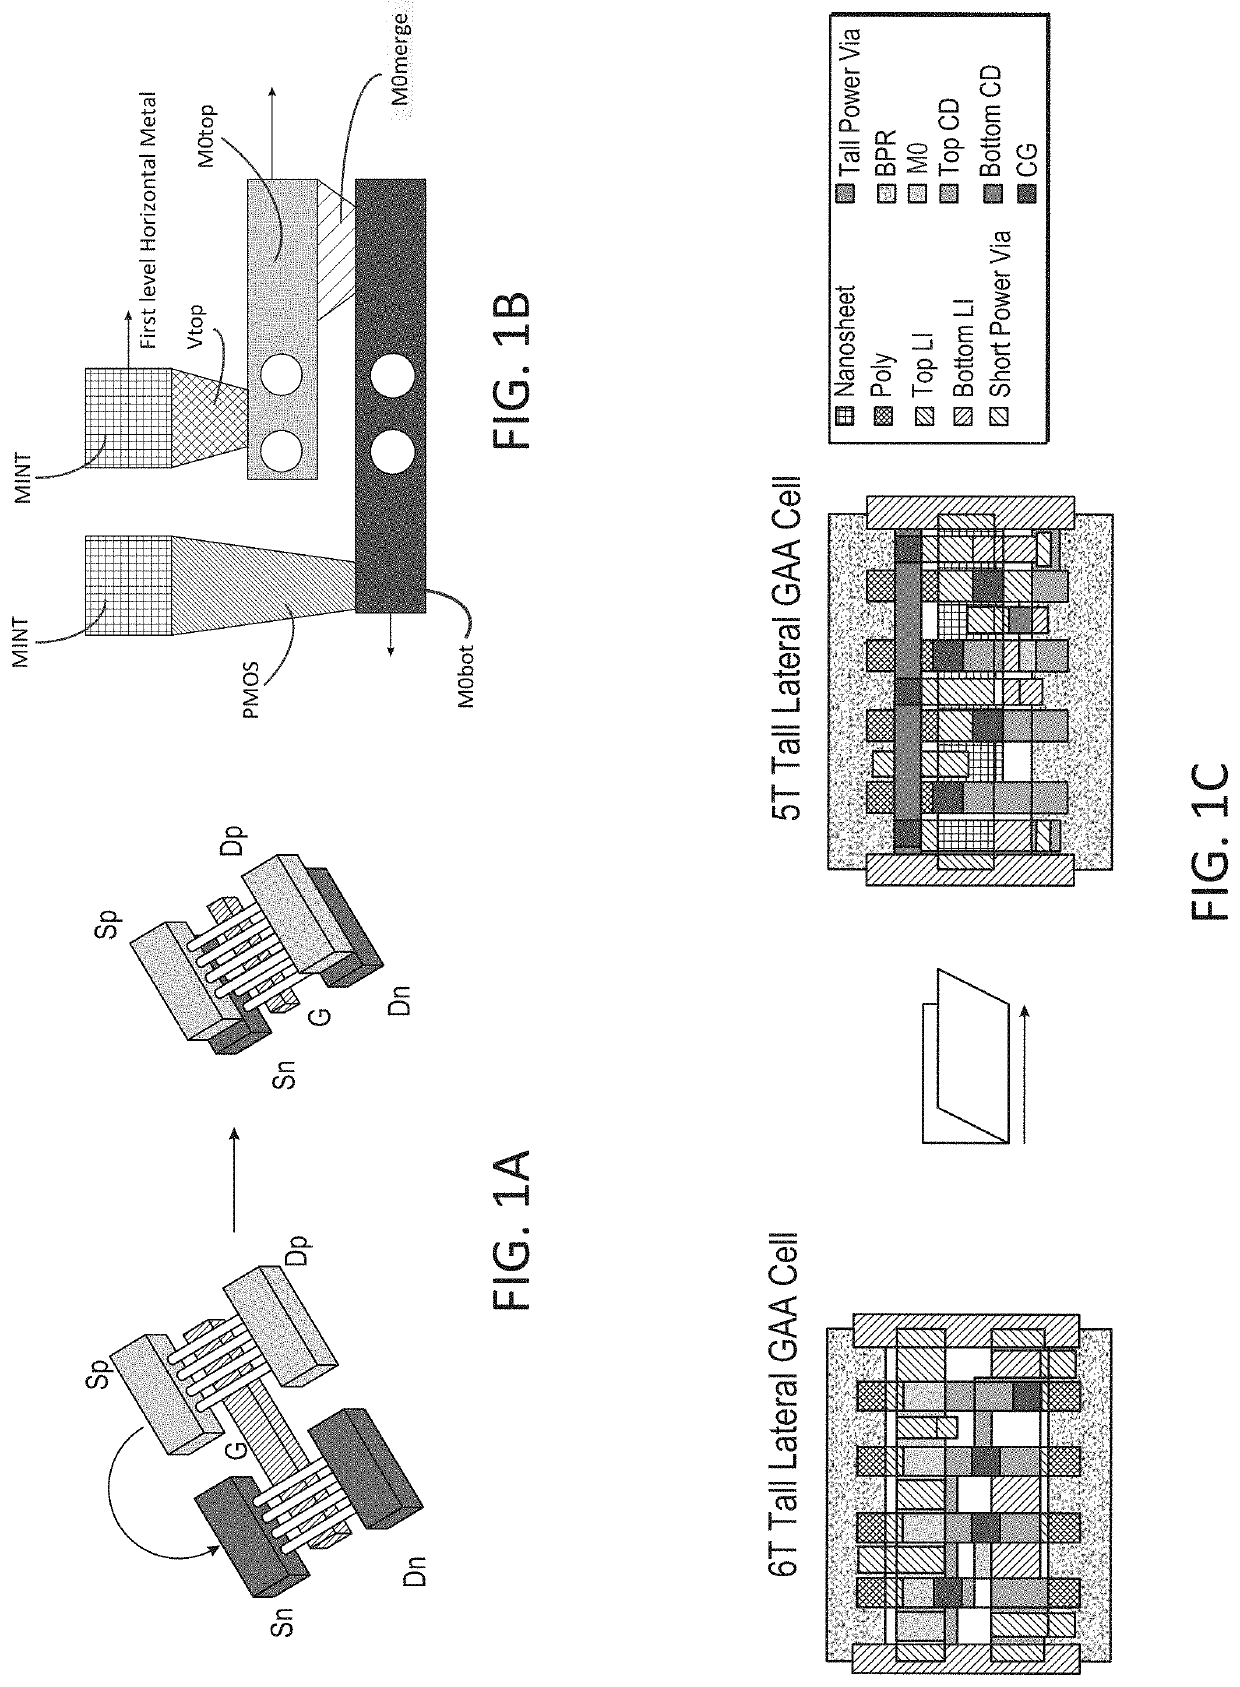 Apparatus and method for simultaneous formation of diffusion break, gate cut, and independent n and p gates for 3D transistor devices